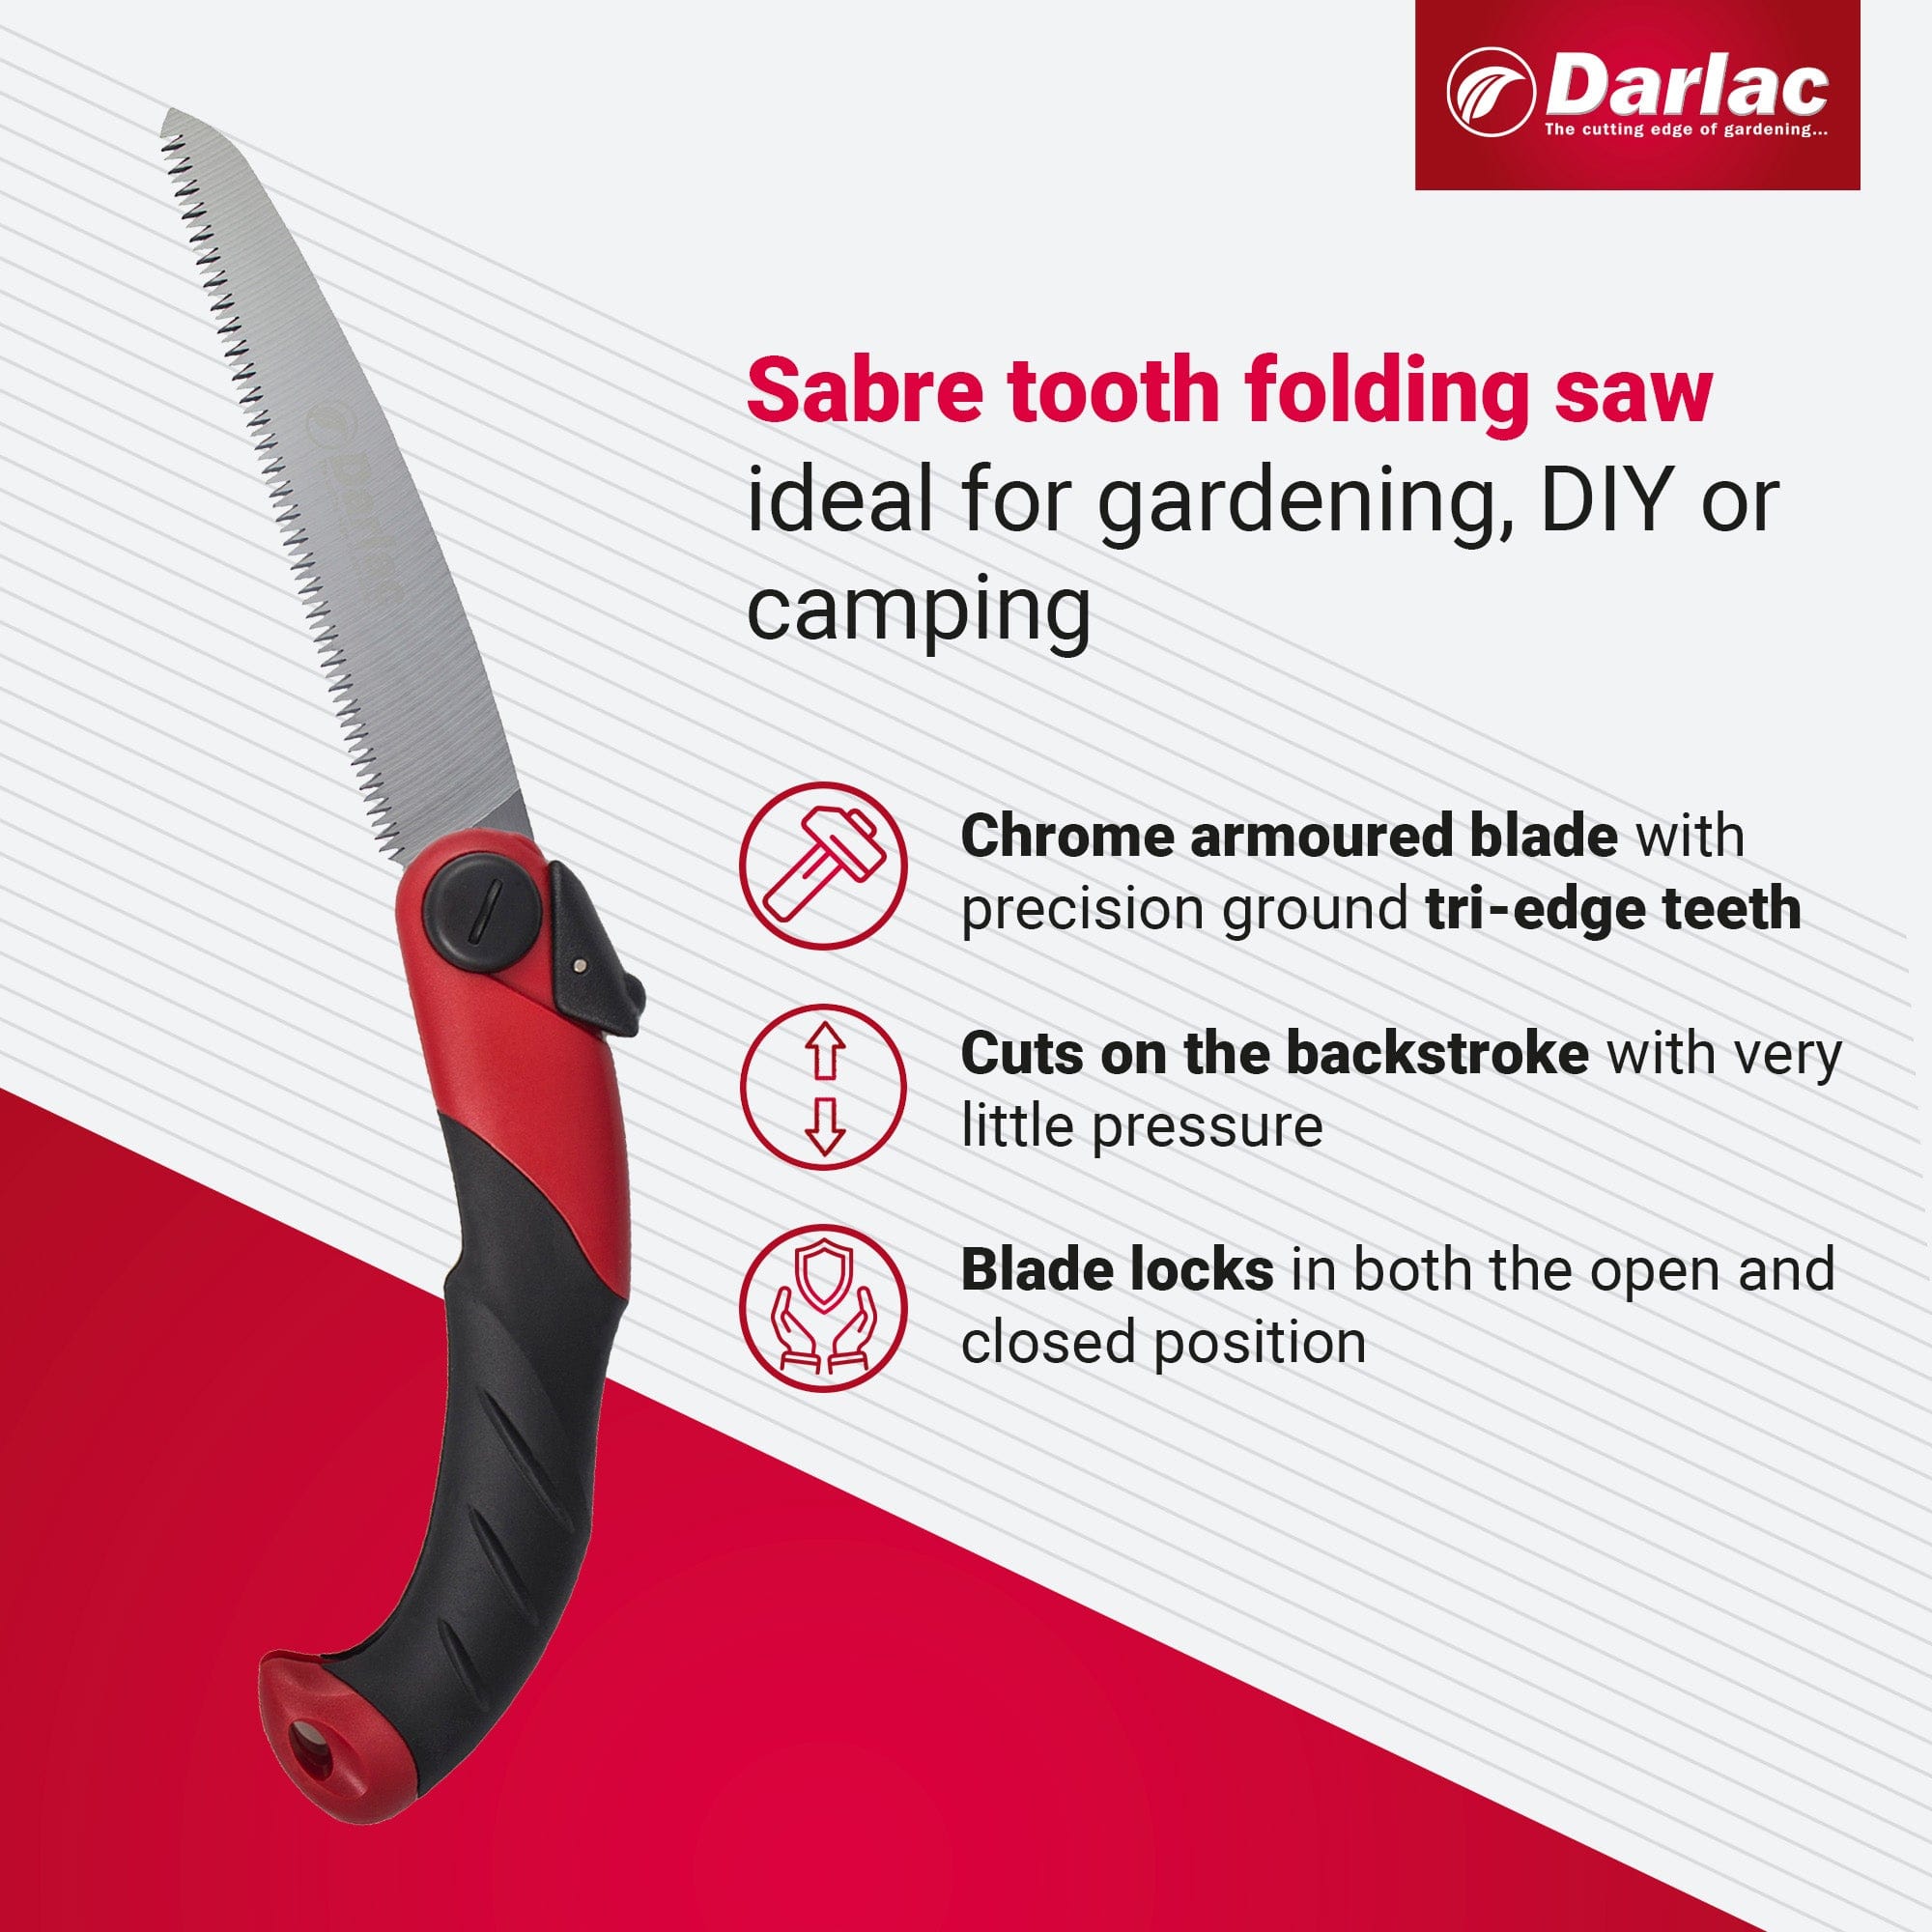 dt-brown HARDWARE Darlac Sabre Tooth Folding Saw